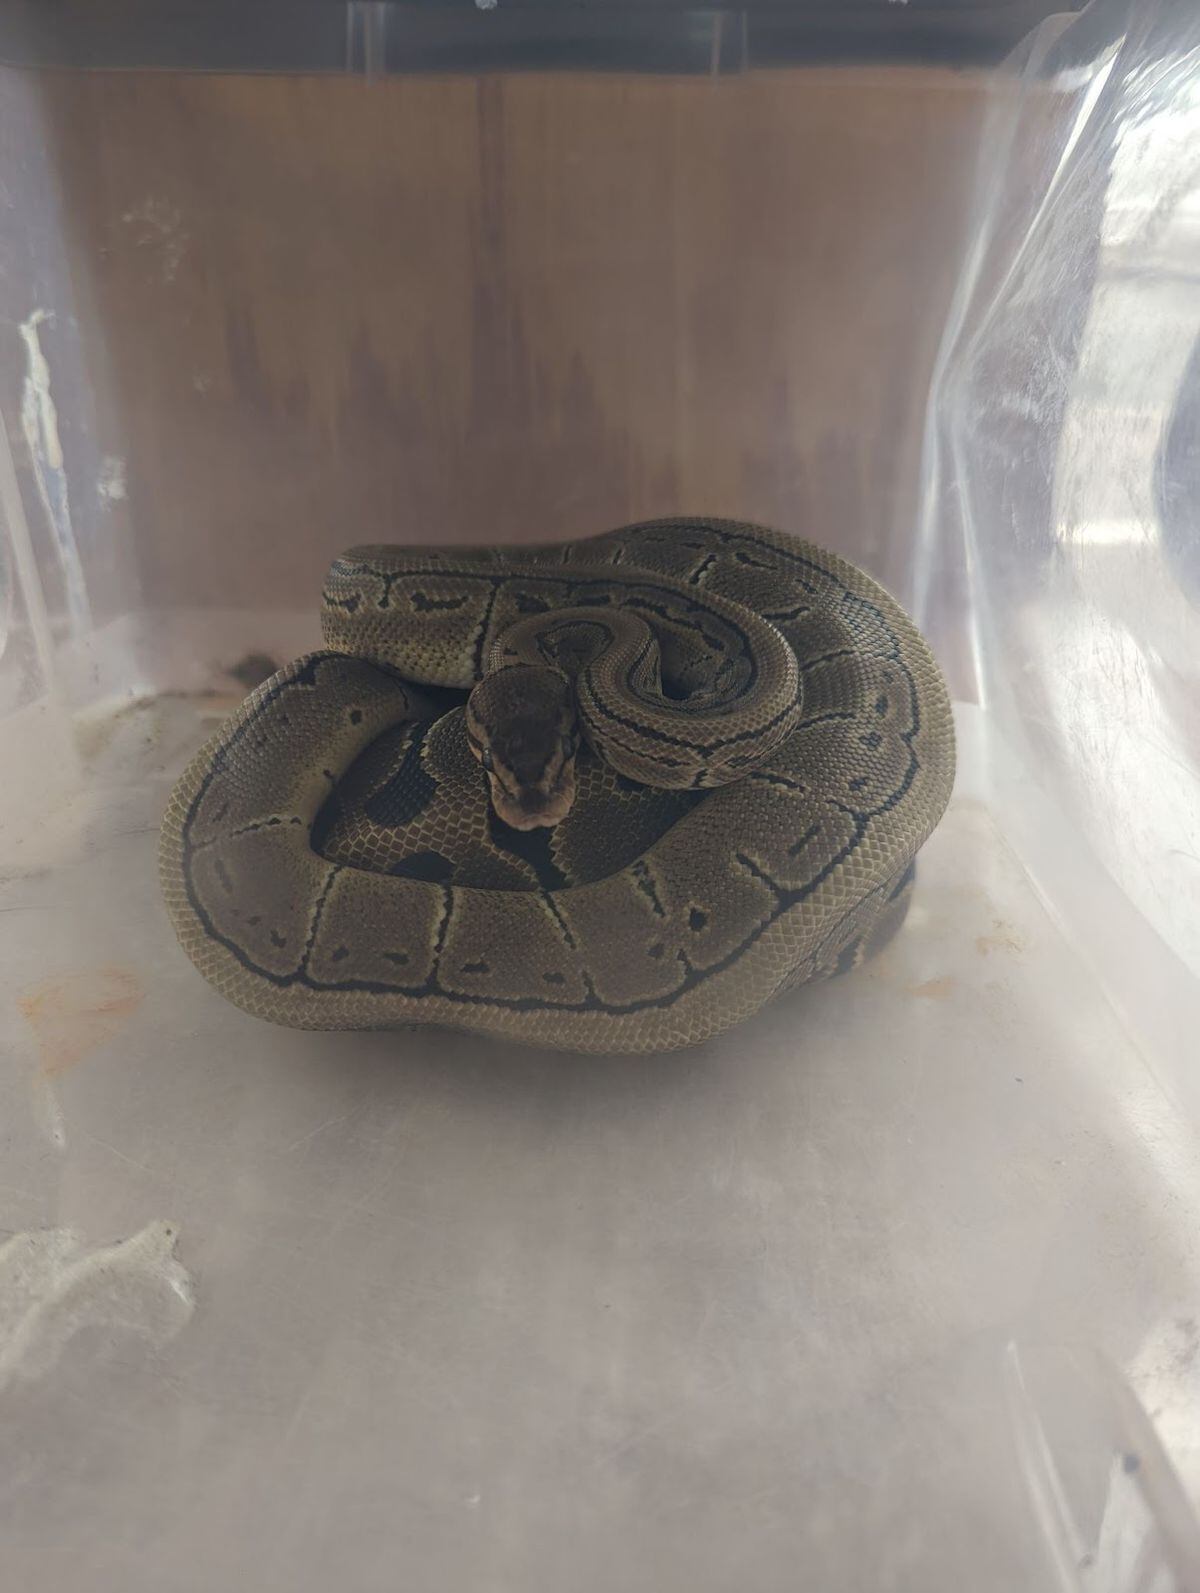 The two young snakes were hurled from a moving car in Birmingham